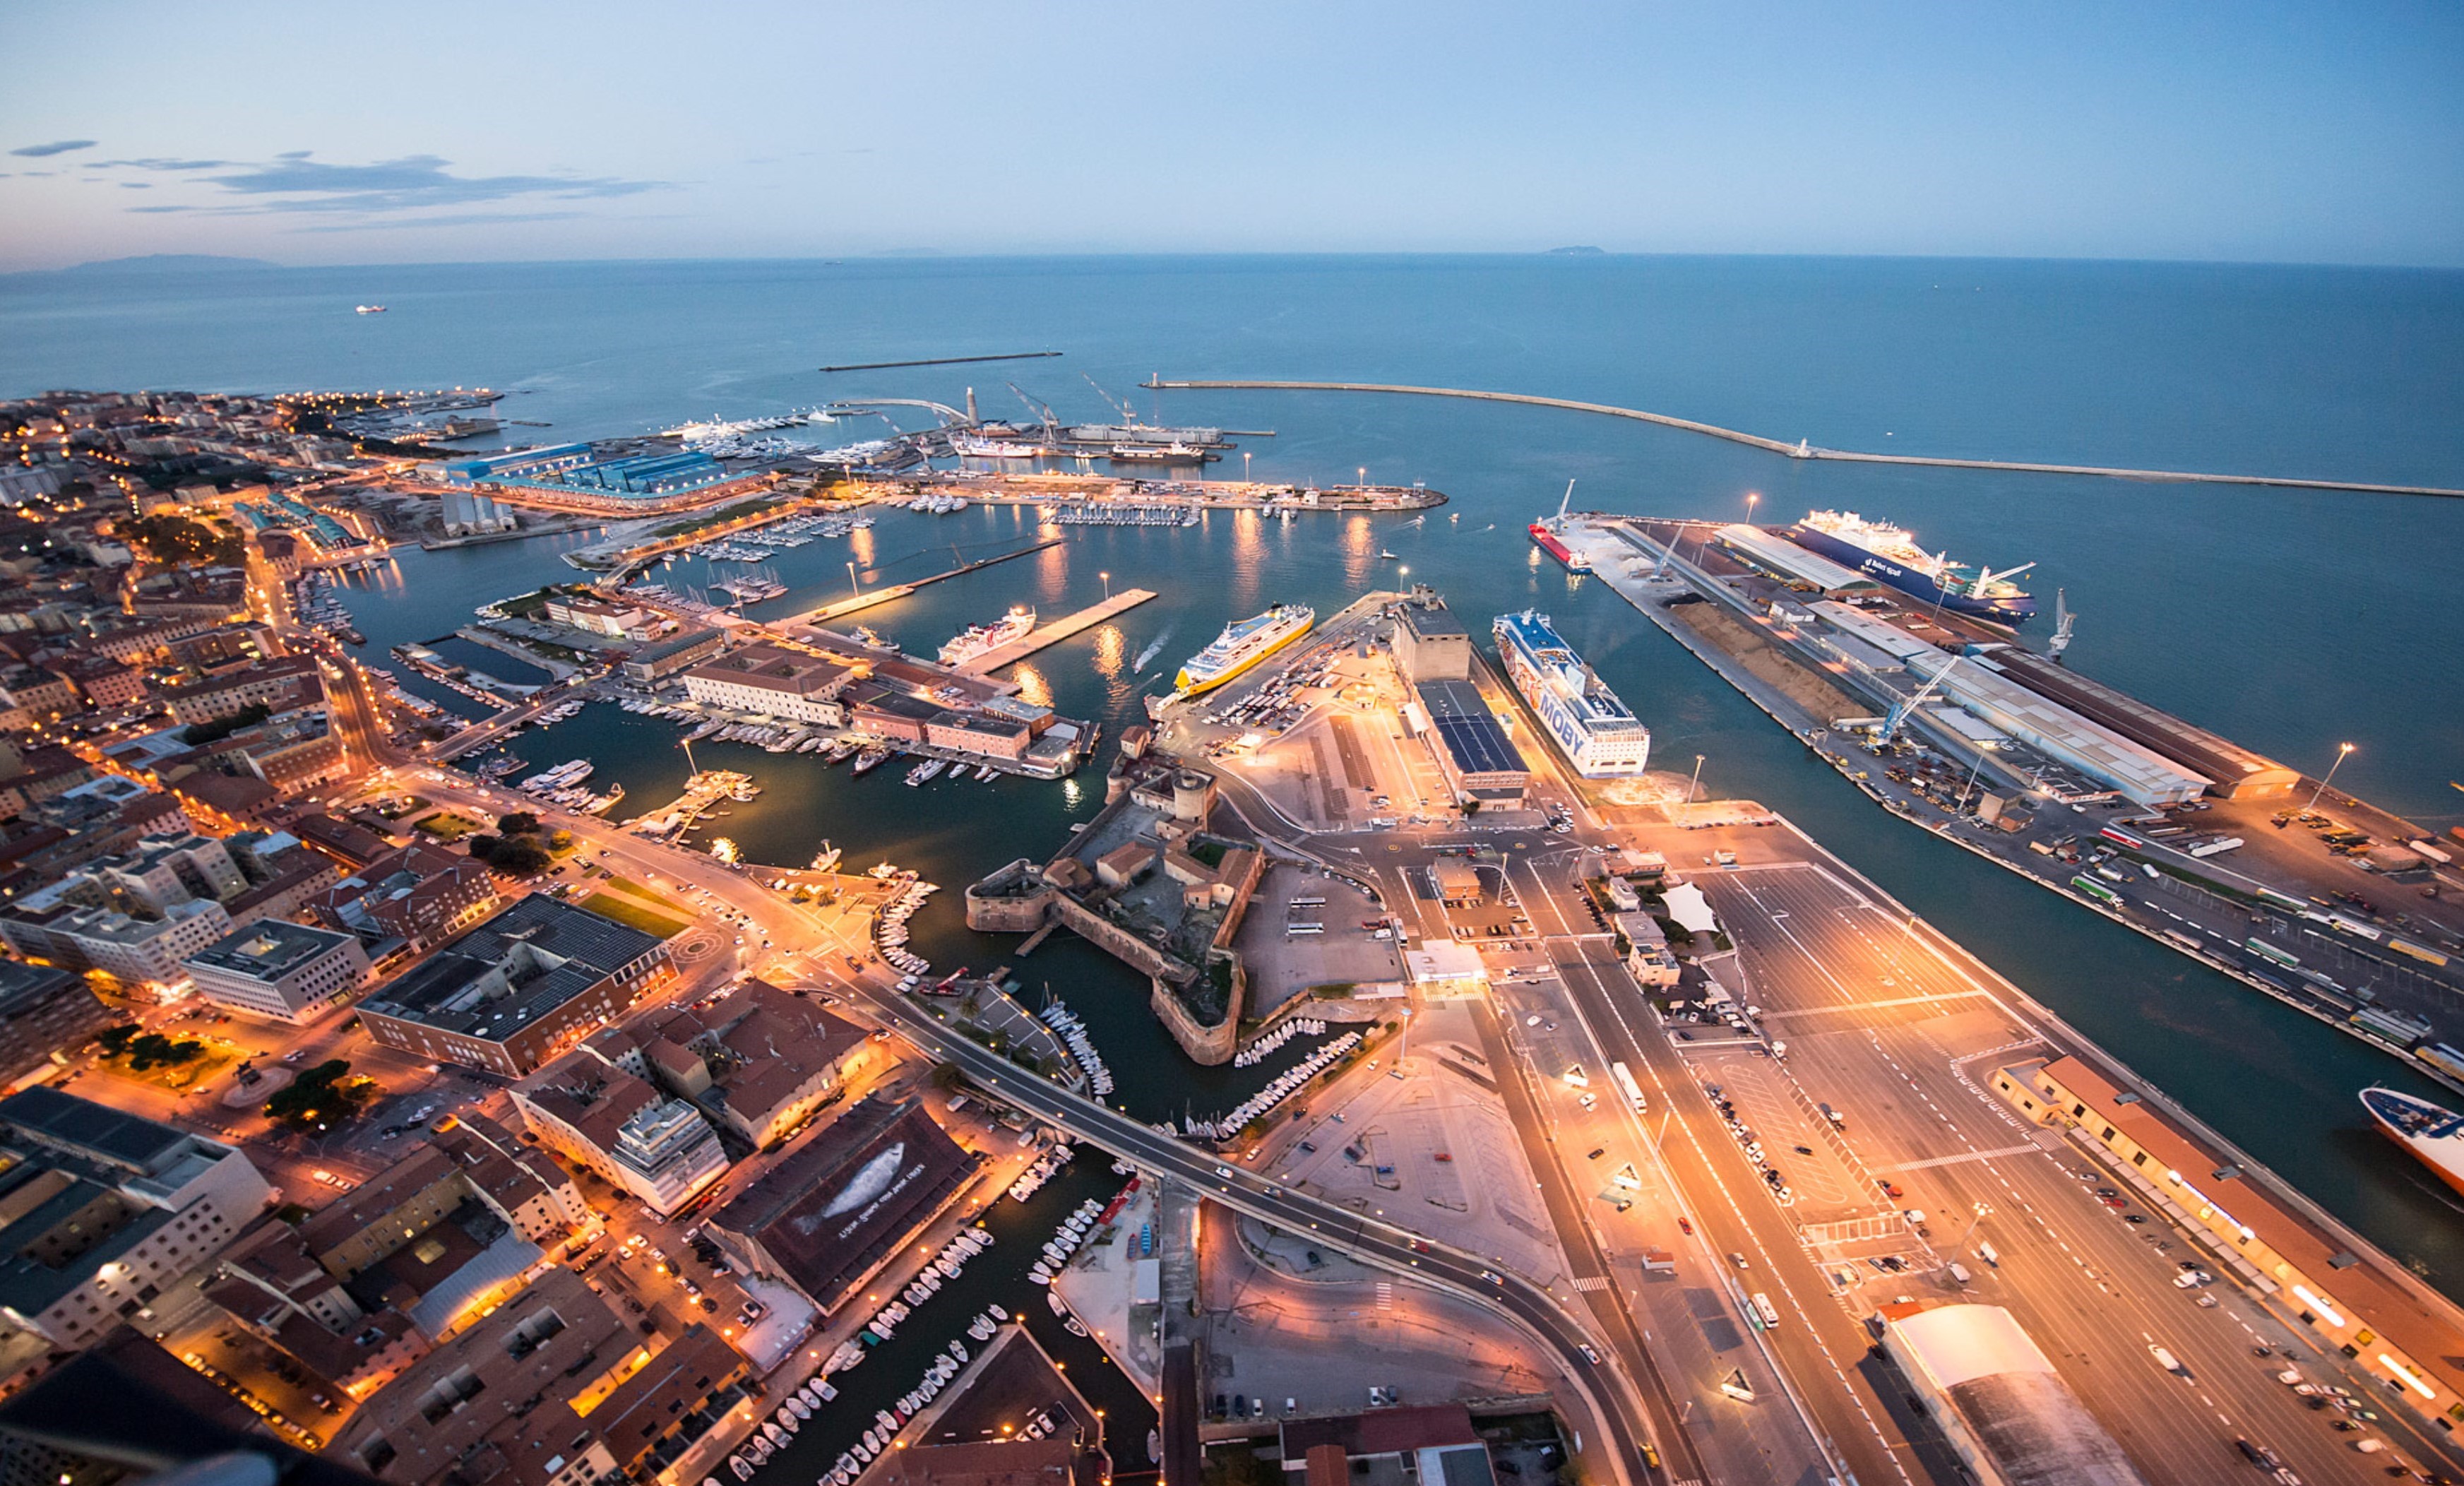 The Port-City Ecosystem. Vision and Tools for Sustainable Development